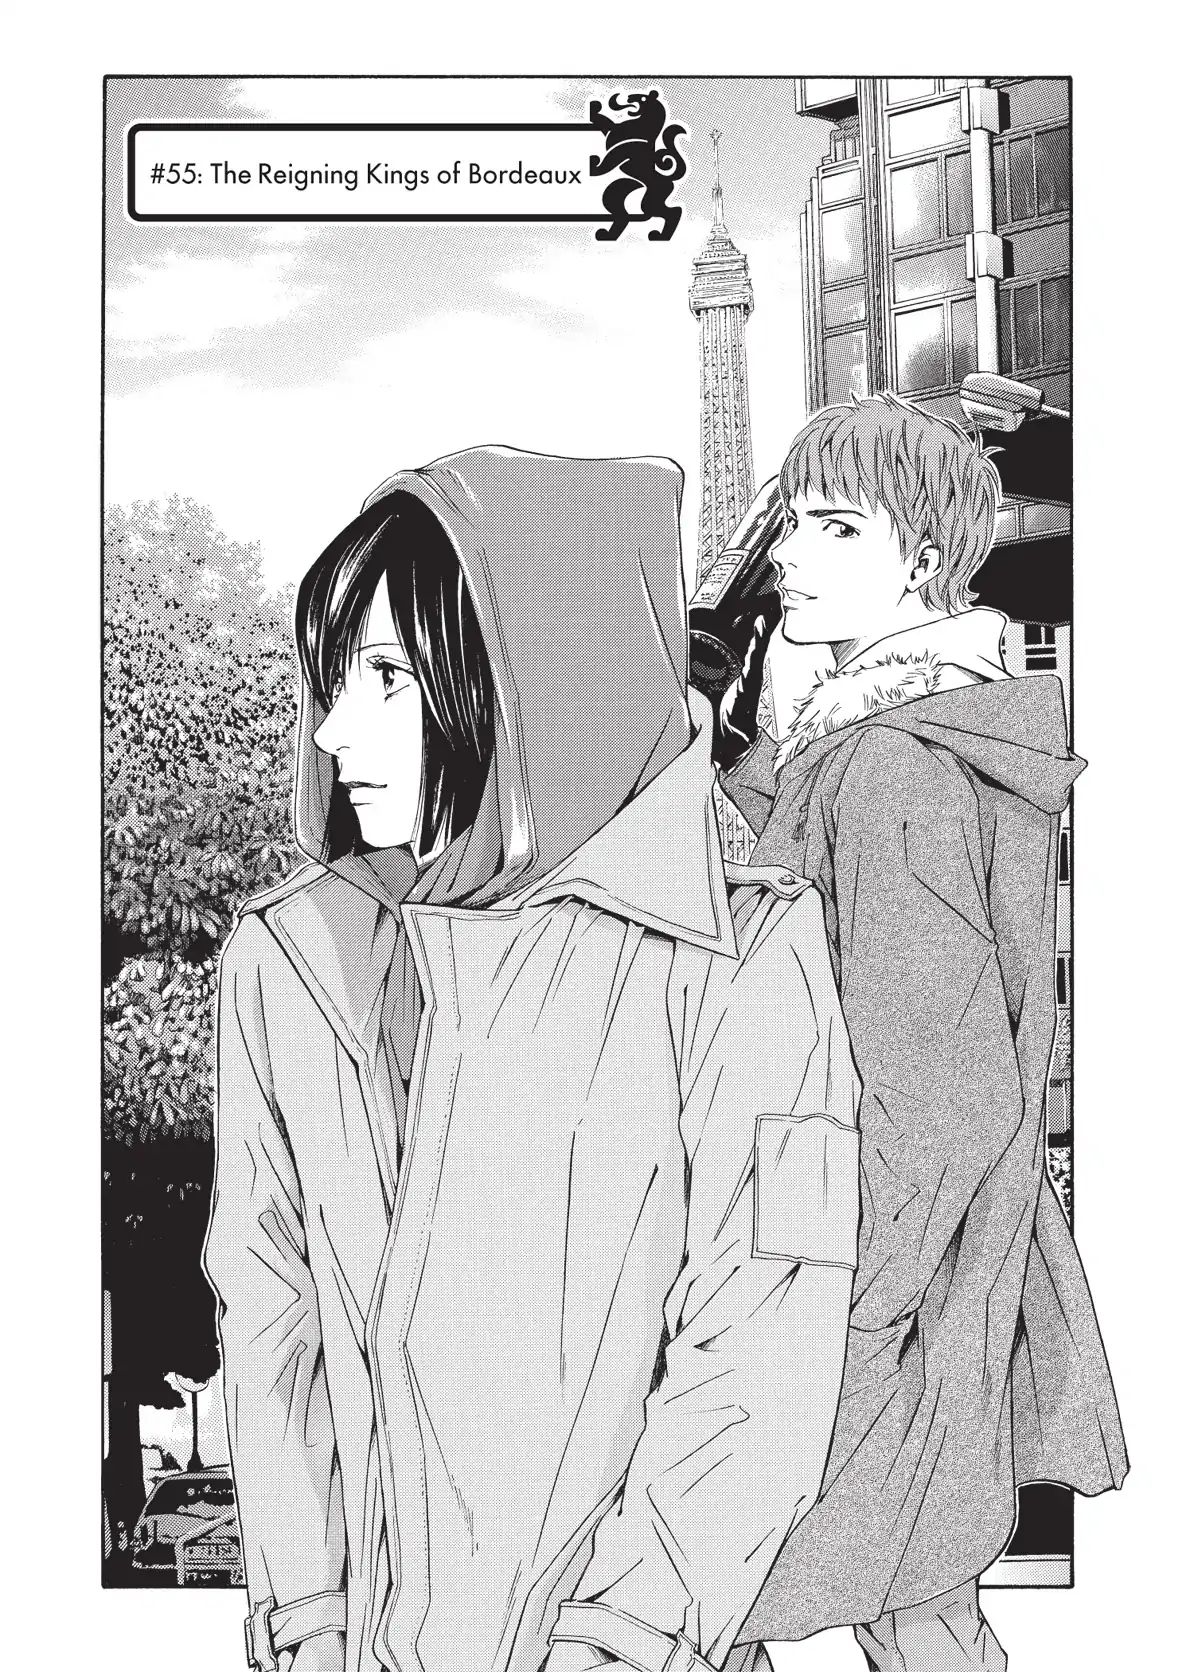 Kami No Shizuku Vol.3 Chapter 55: The Reigning Kings Of Bordeaux - Picture 1